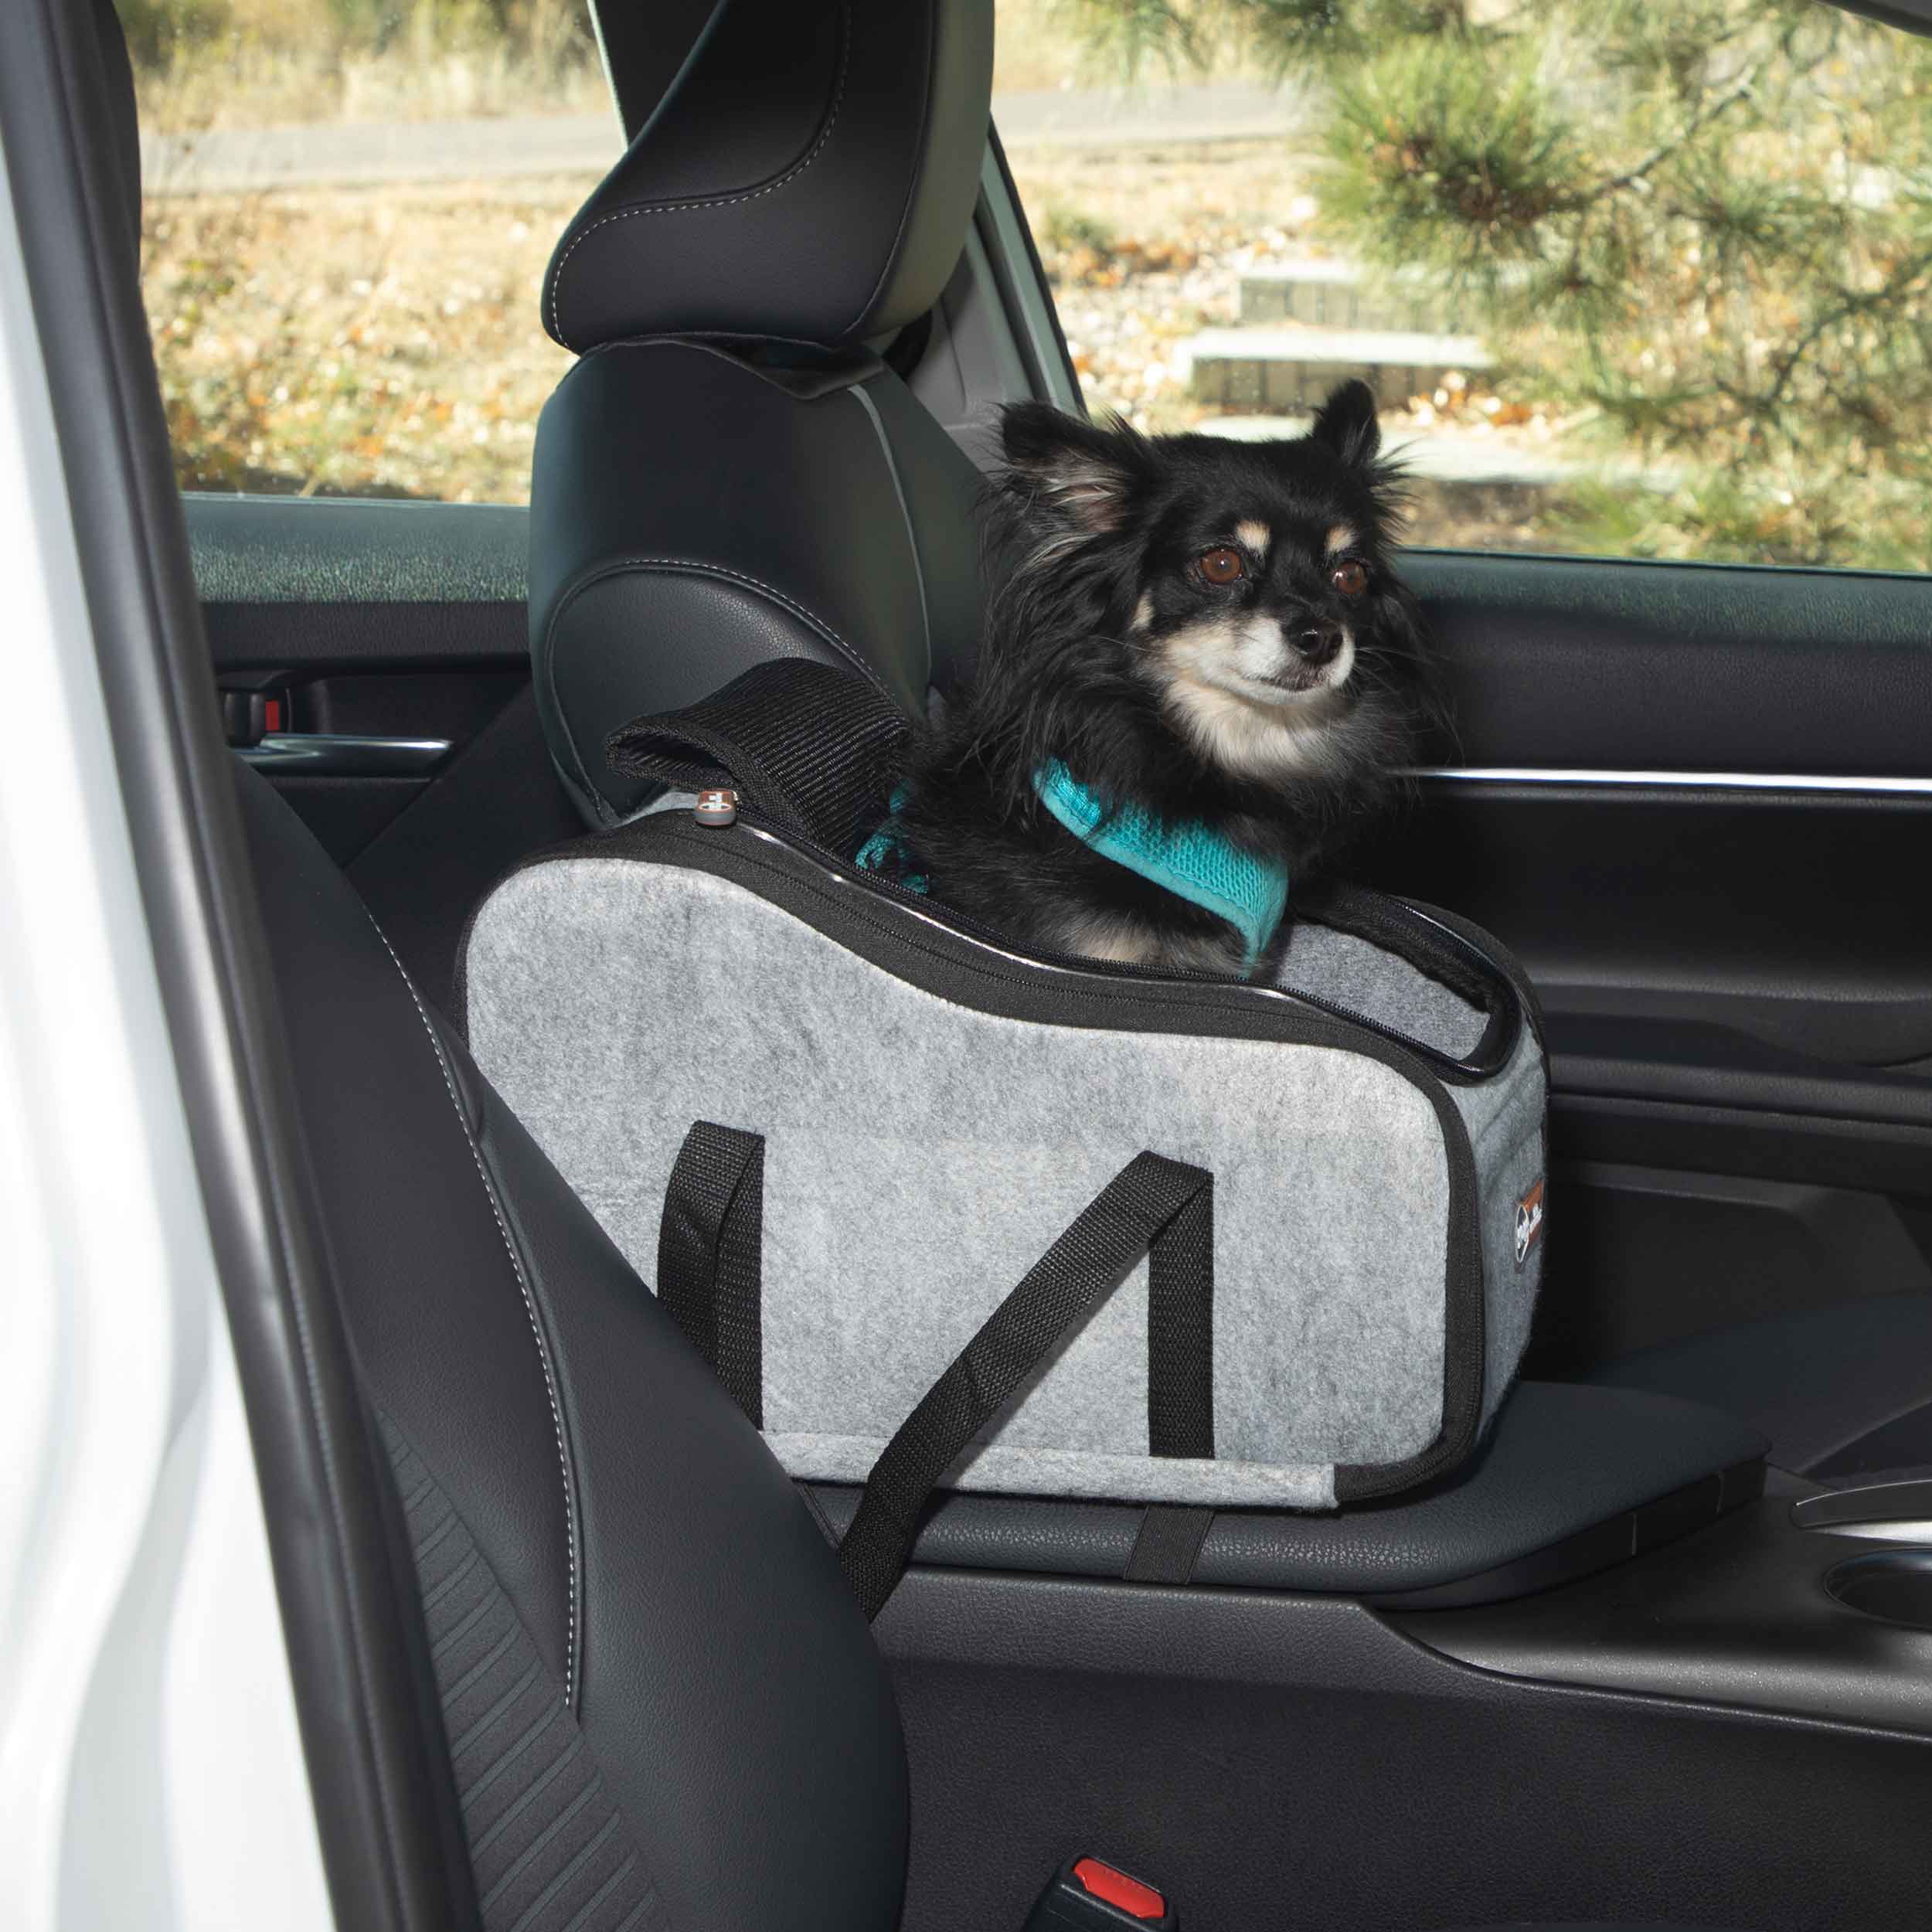 kh100550270 Portable Pet Console Booster Dog Car Seat